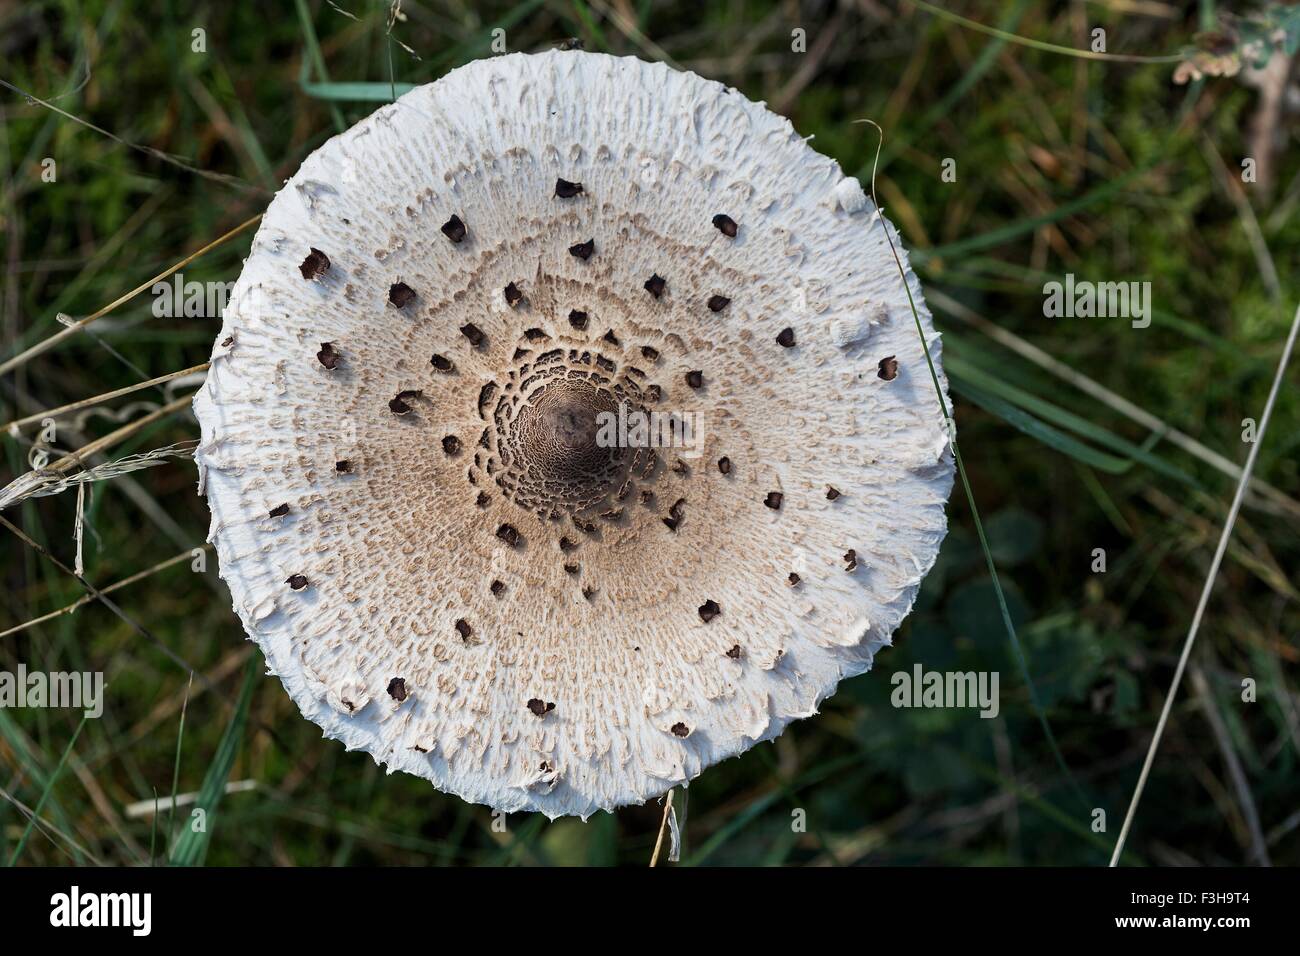 Overhead close up of white spotted mushroom in grass Stock Photo